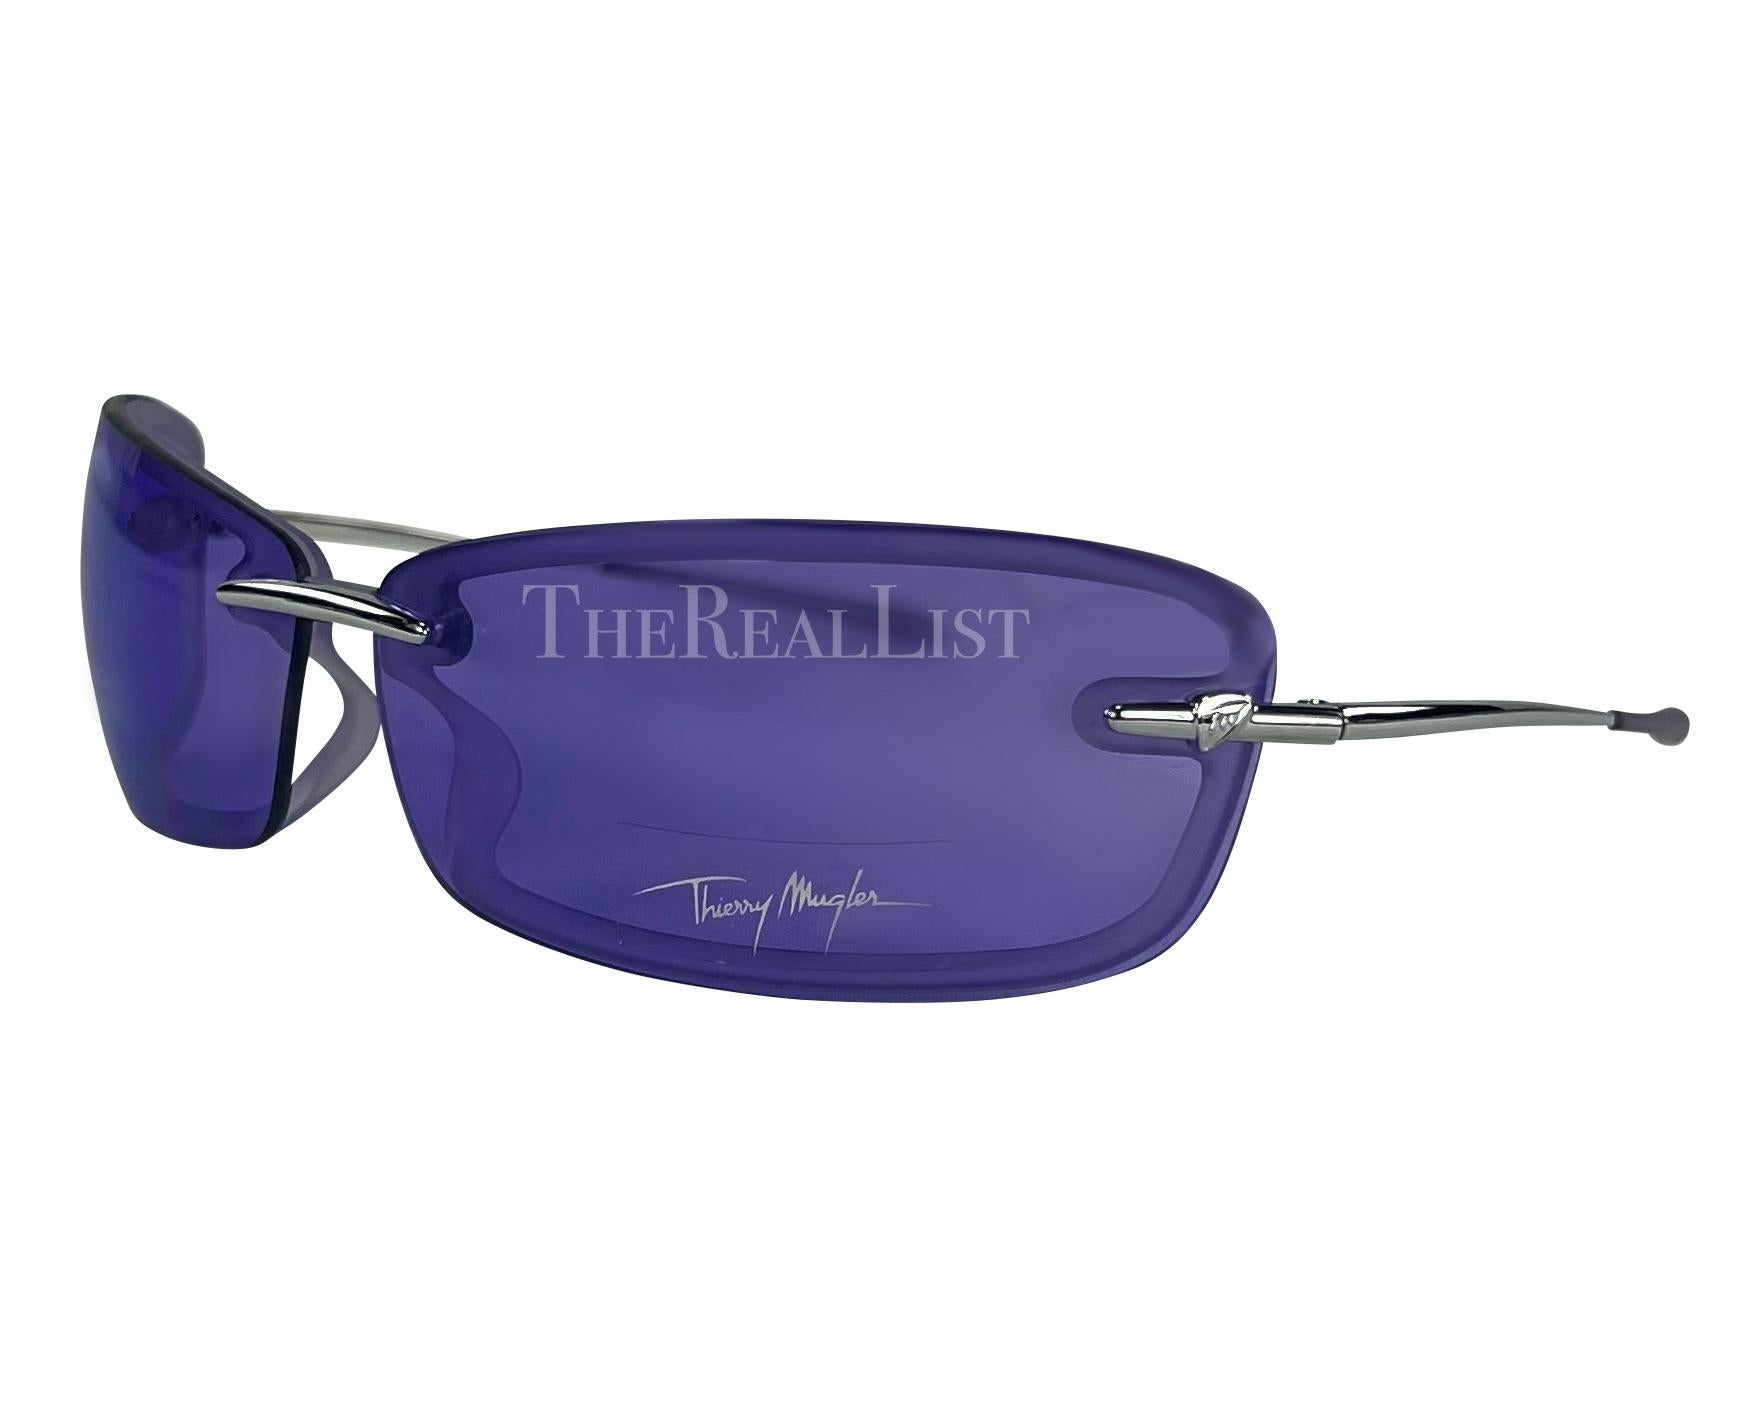 Presenting a pair of incredible purple Thierry Mugler sunglasses, designed by Manfred Mugler. From the early 2000s, these rimless sunglasses feature purple rectangular lenses and silver-tone arms. Never worn before, these sunglasses are made